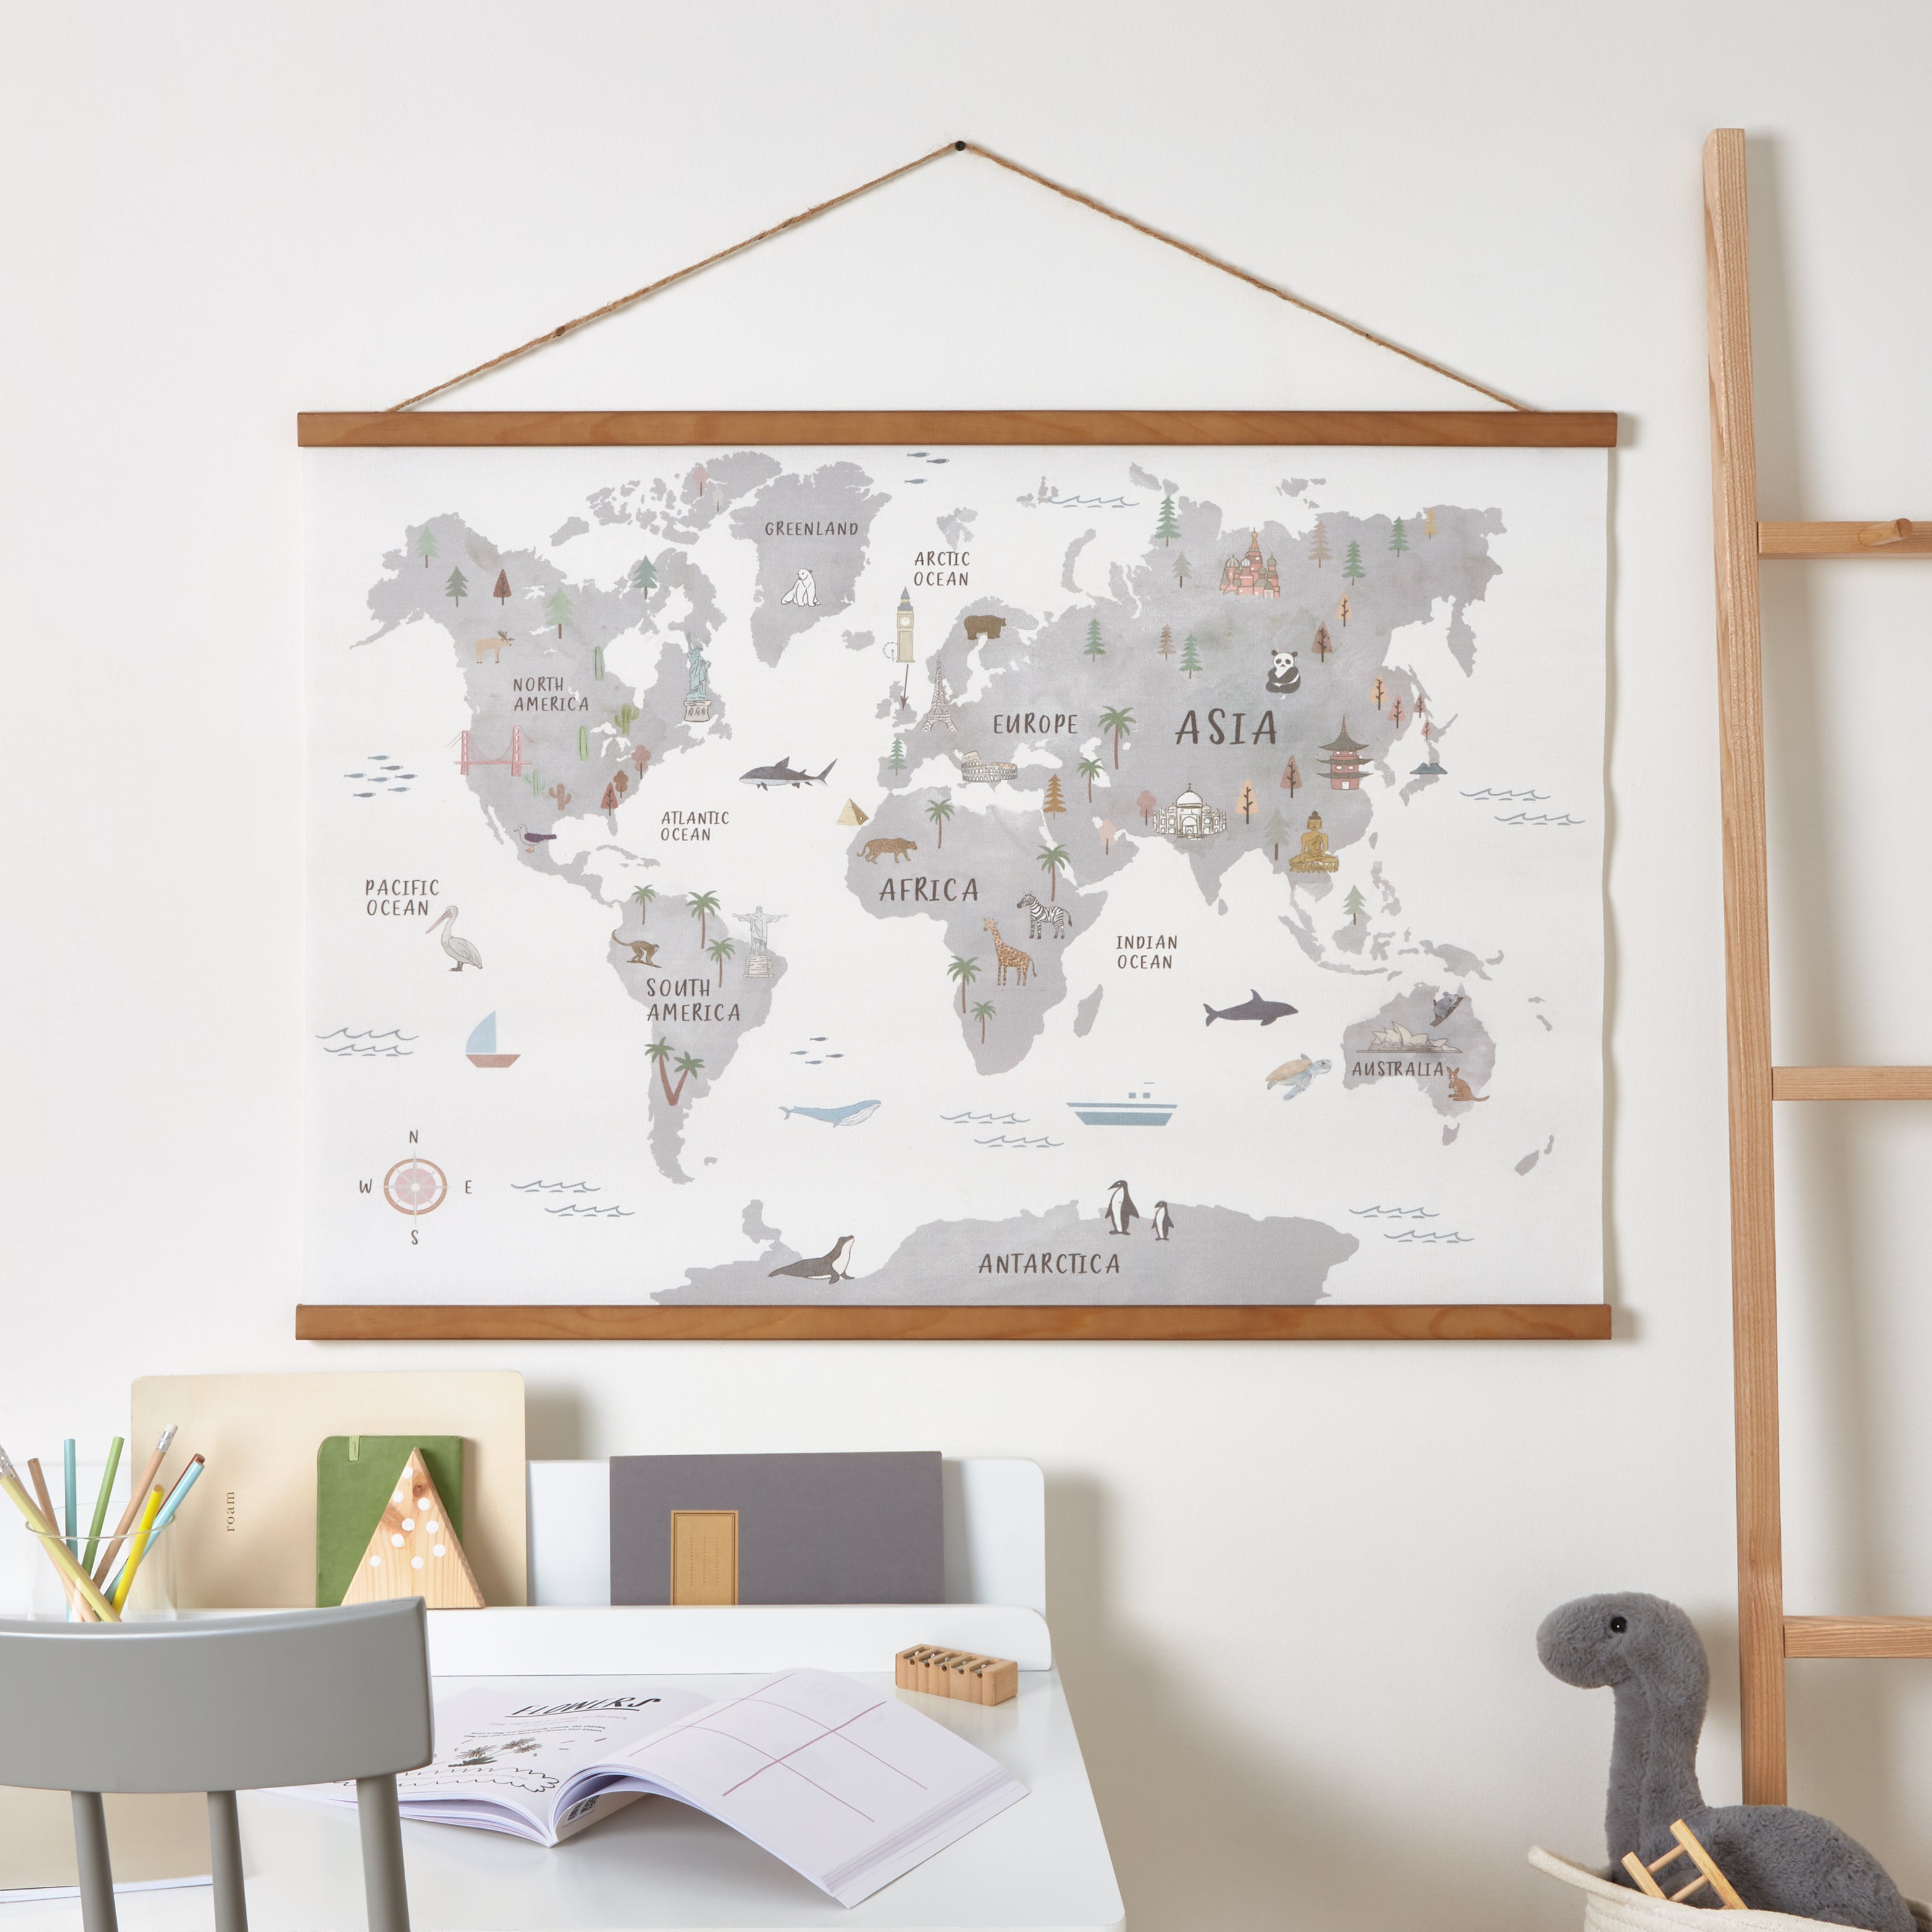 Kid's World Map Wall Hanging